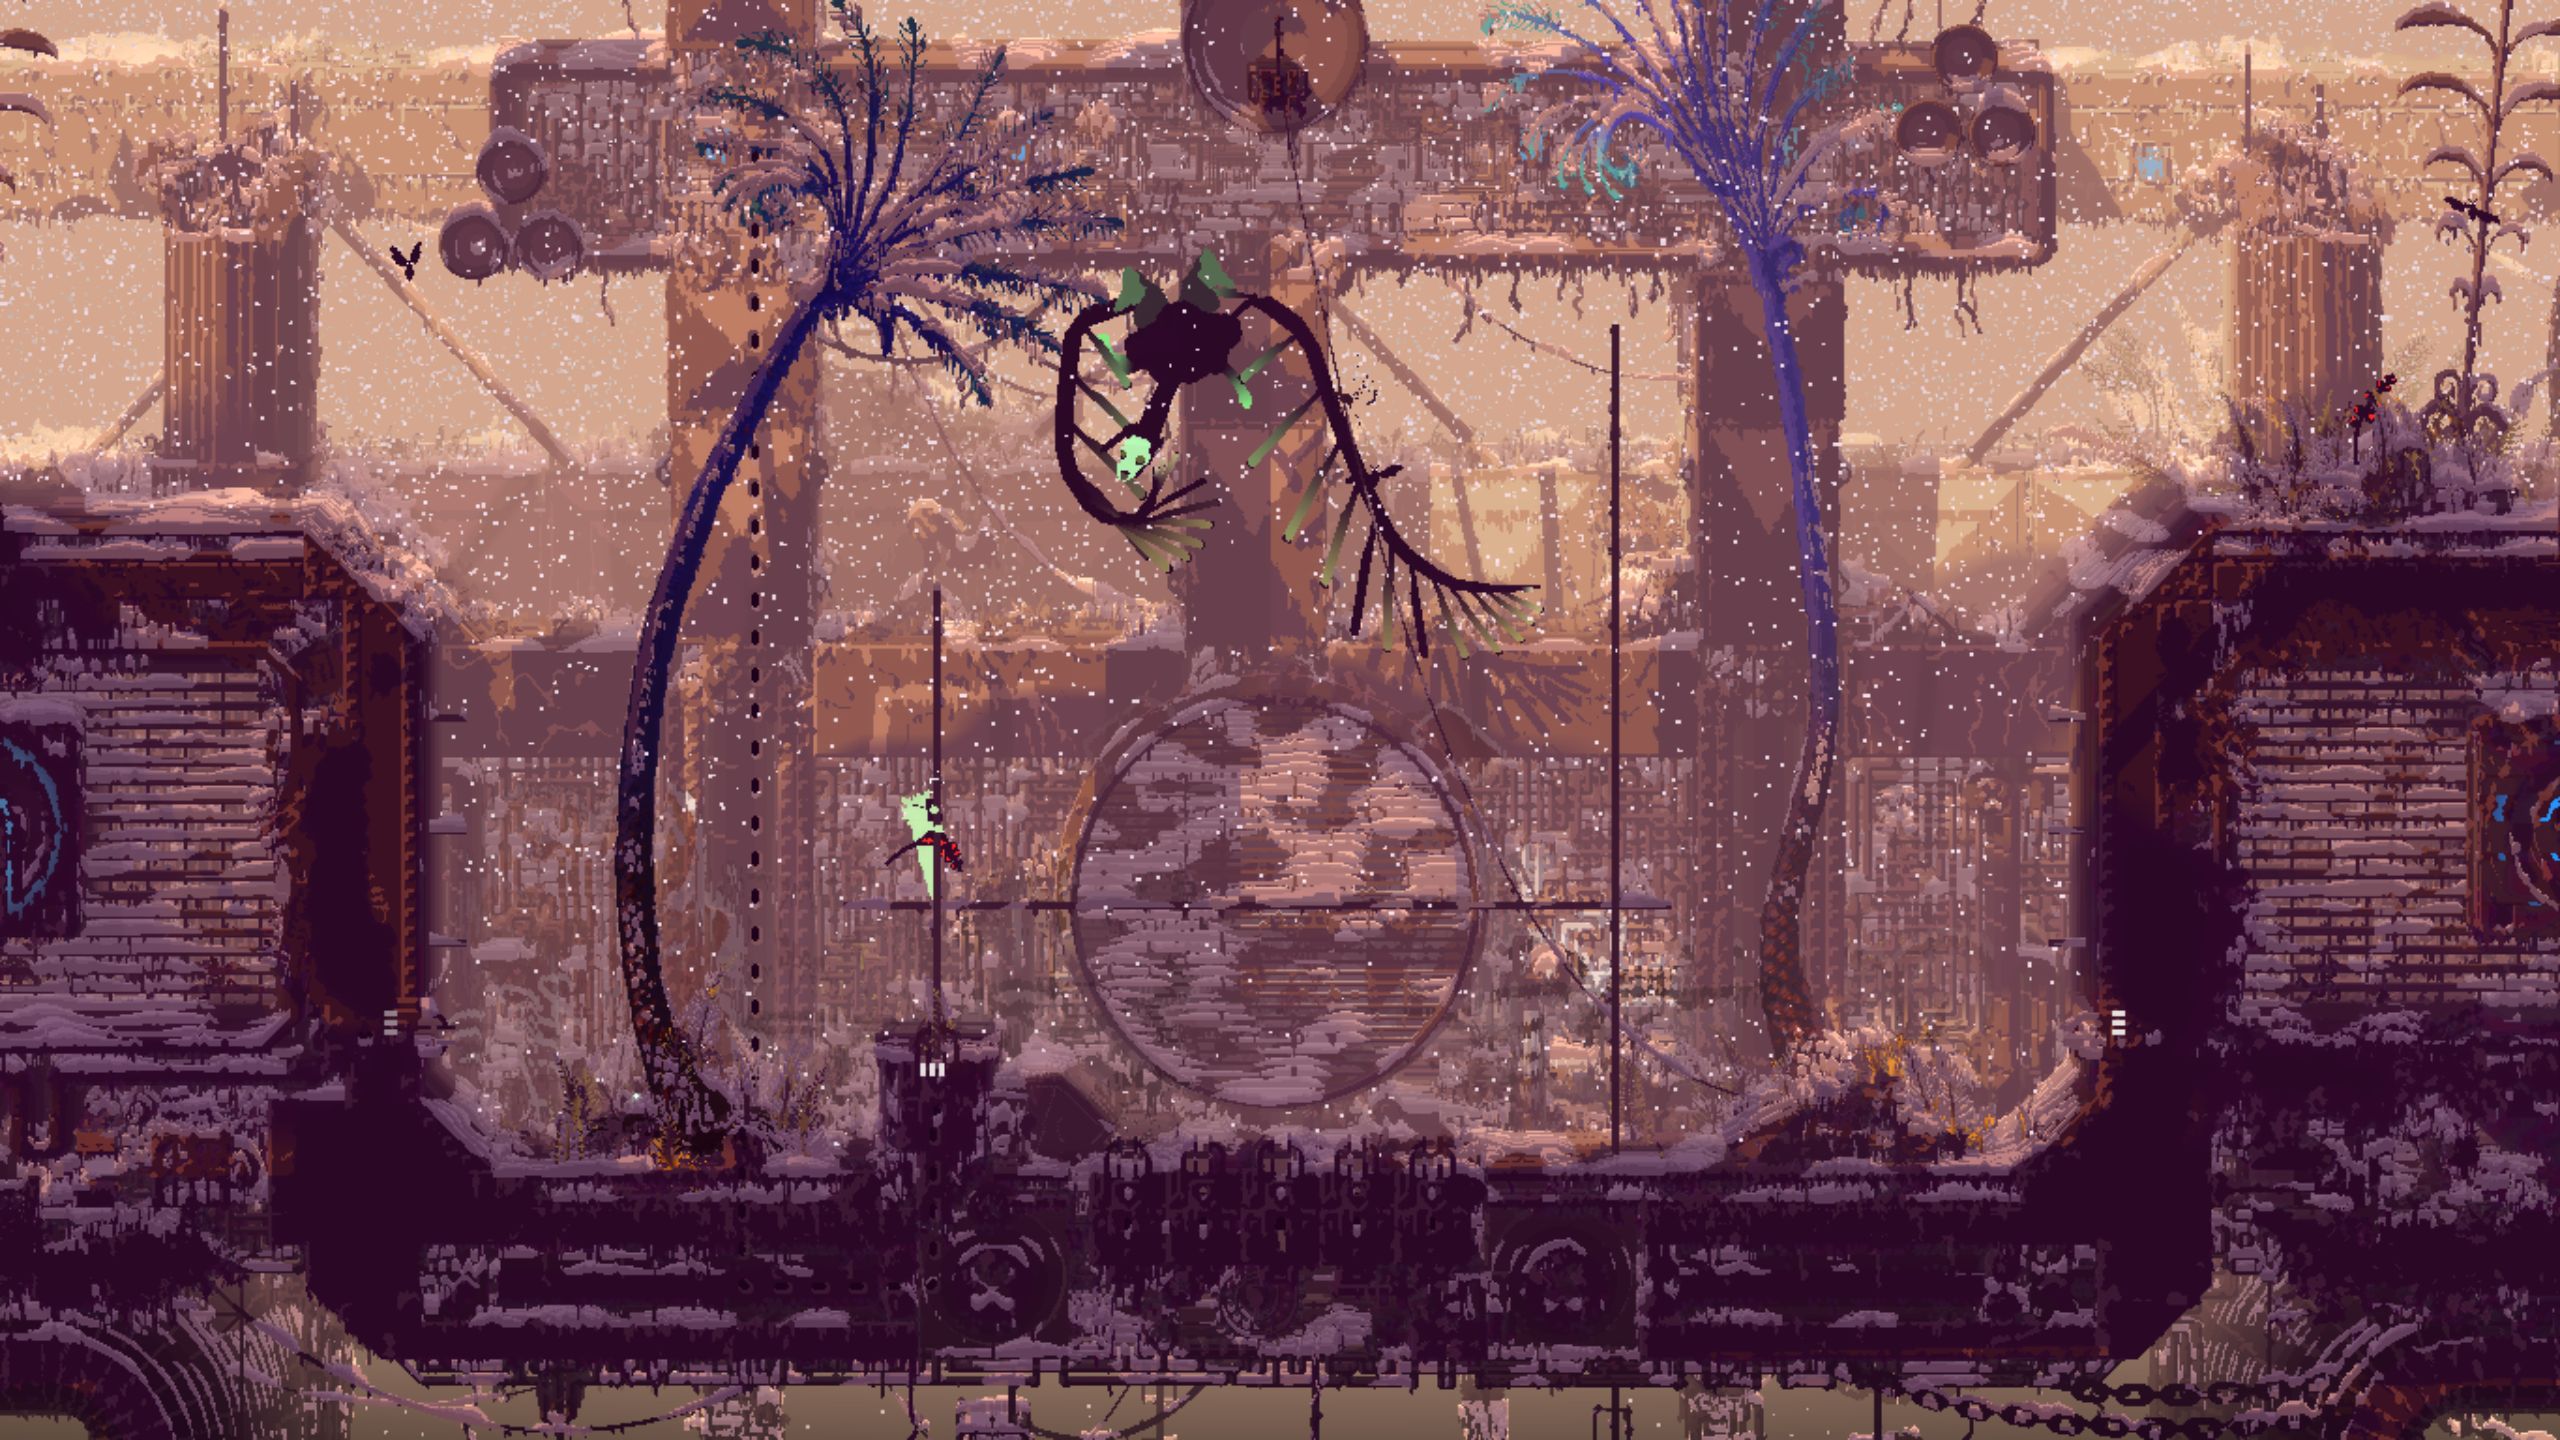 A snowy scene in Rain World Downpour, in what looks like an area of a disused industrial factory. The player character, a pale green slug cat, climbs a pole towards a menacing bird-like creature with fringe-like wings. The scene is framed by a tall, thin, blue palm tree on either side